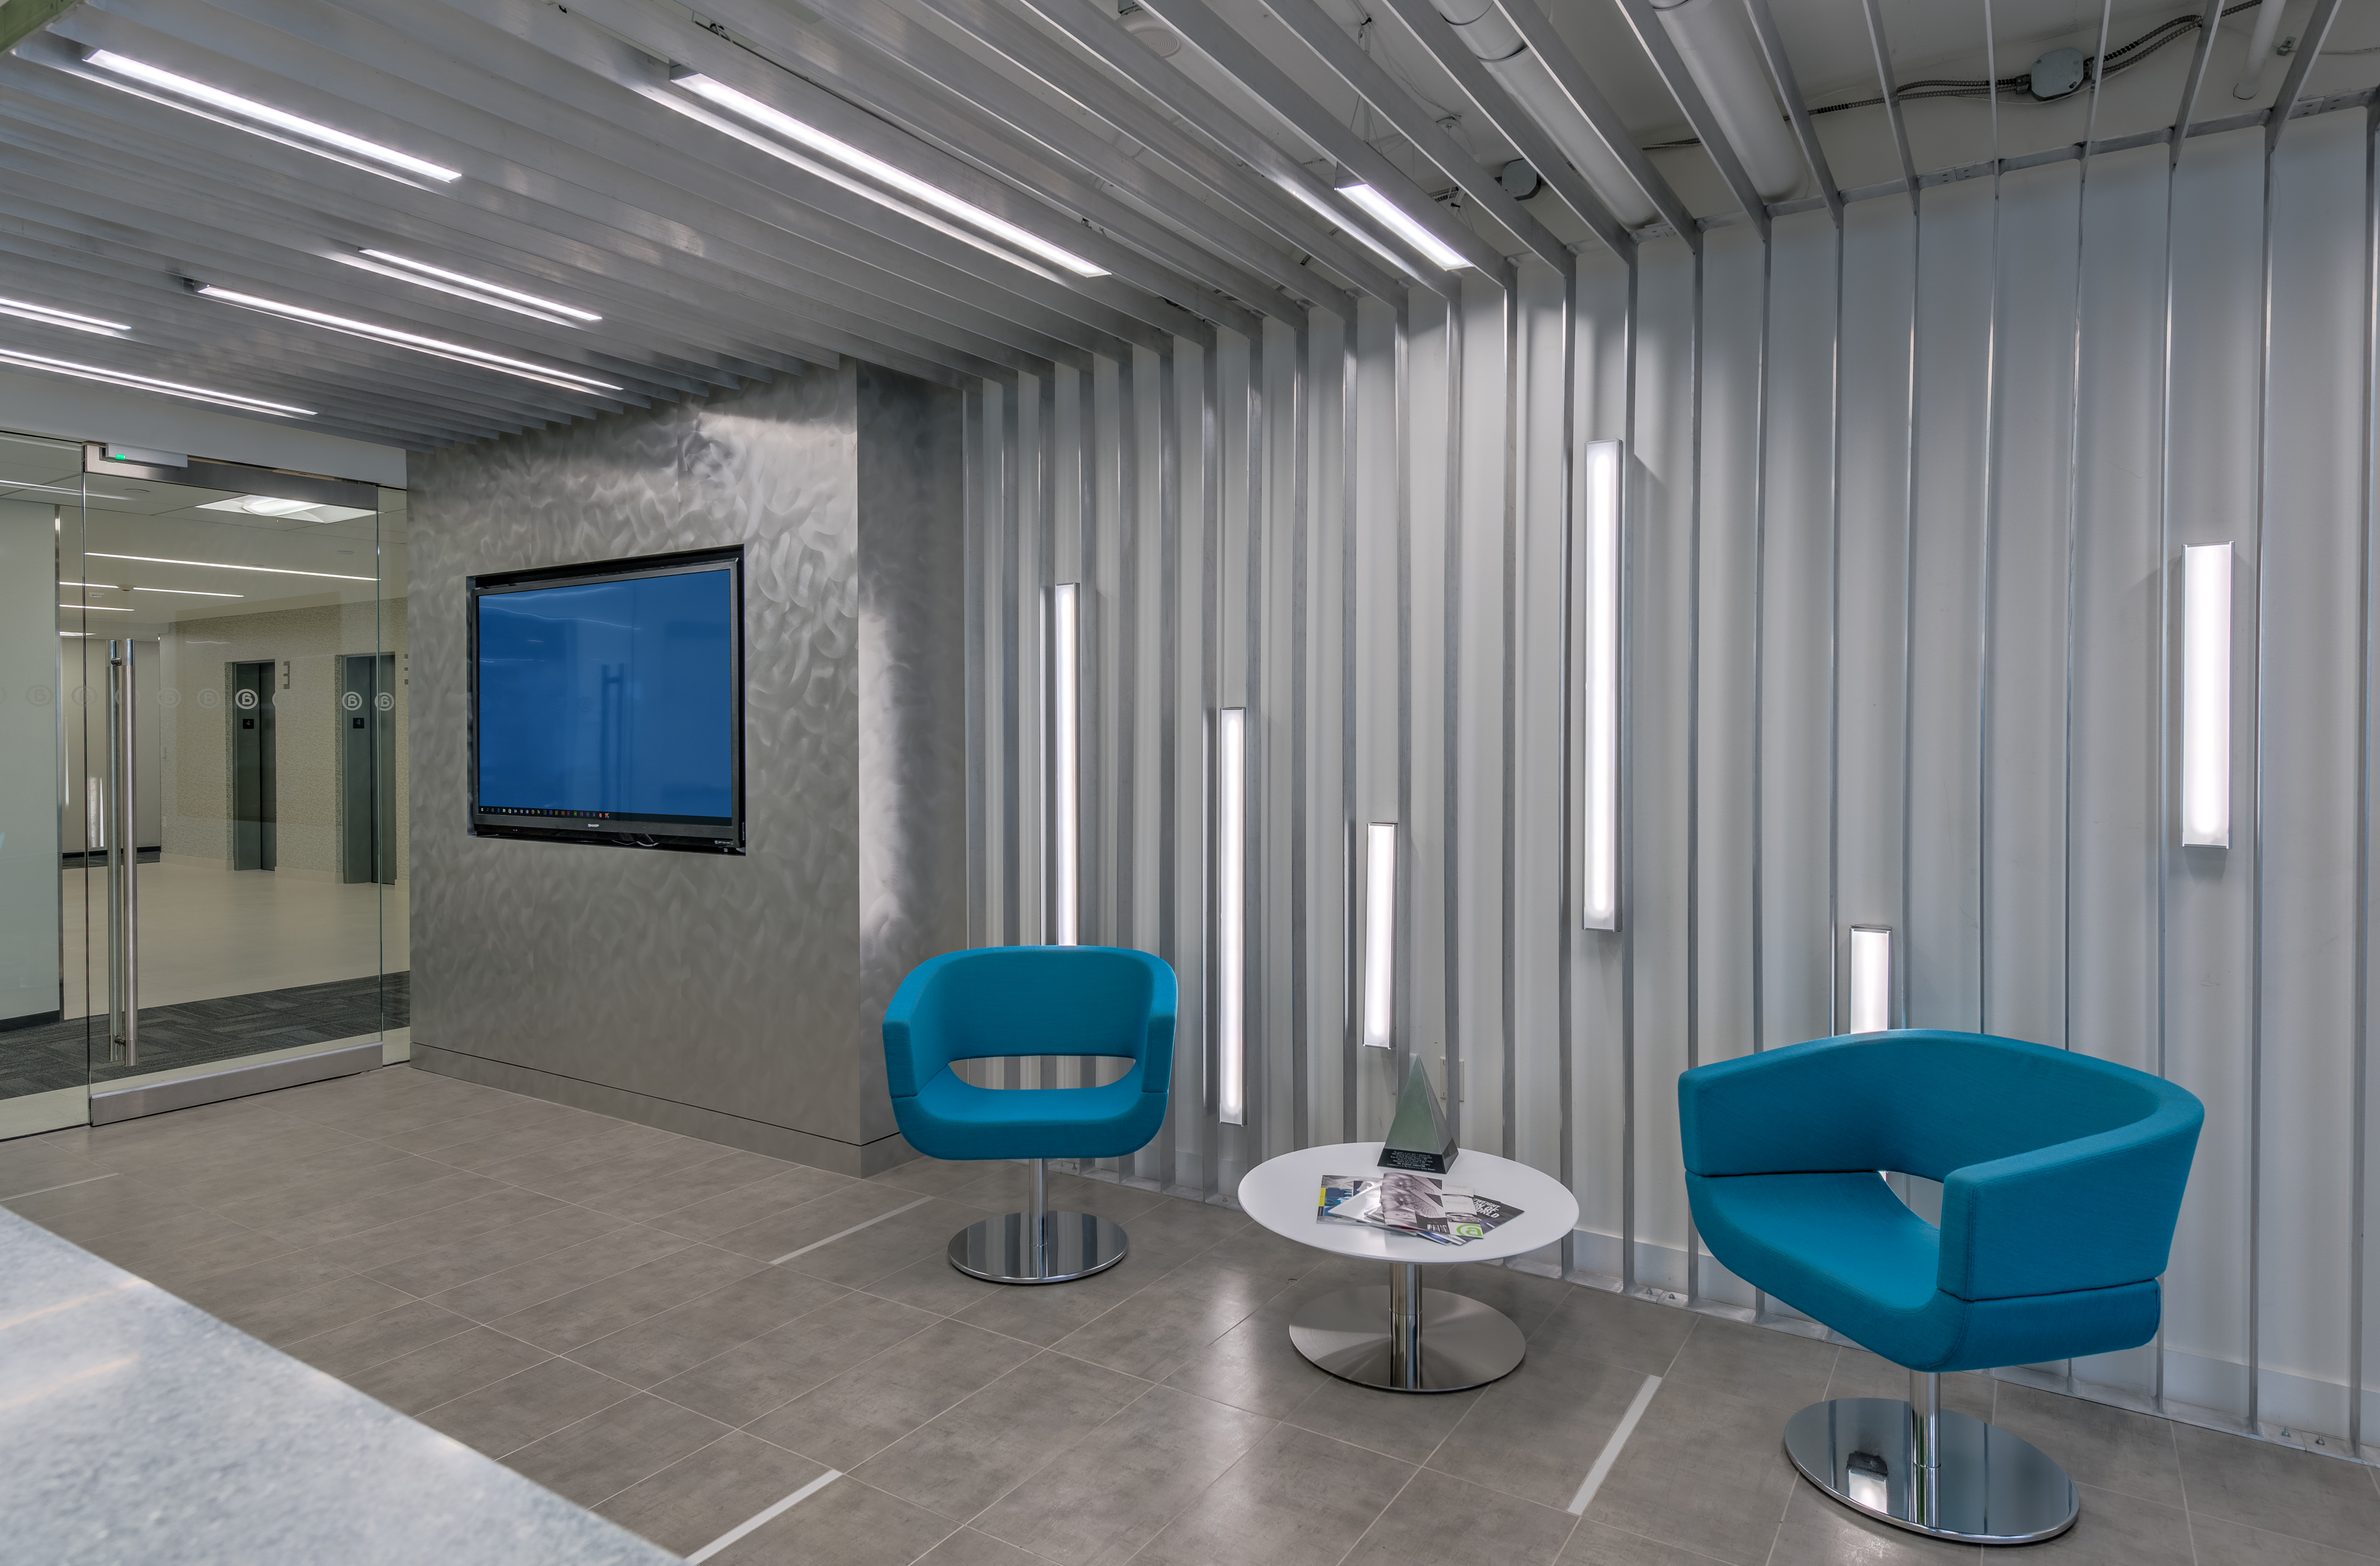 Aluminum Association office lobby with blue chairs and aluminum details